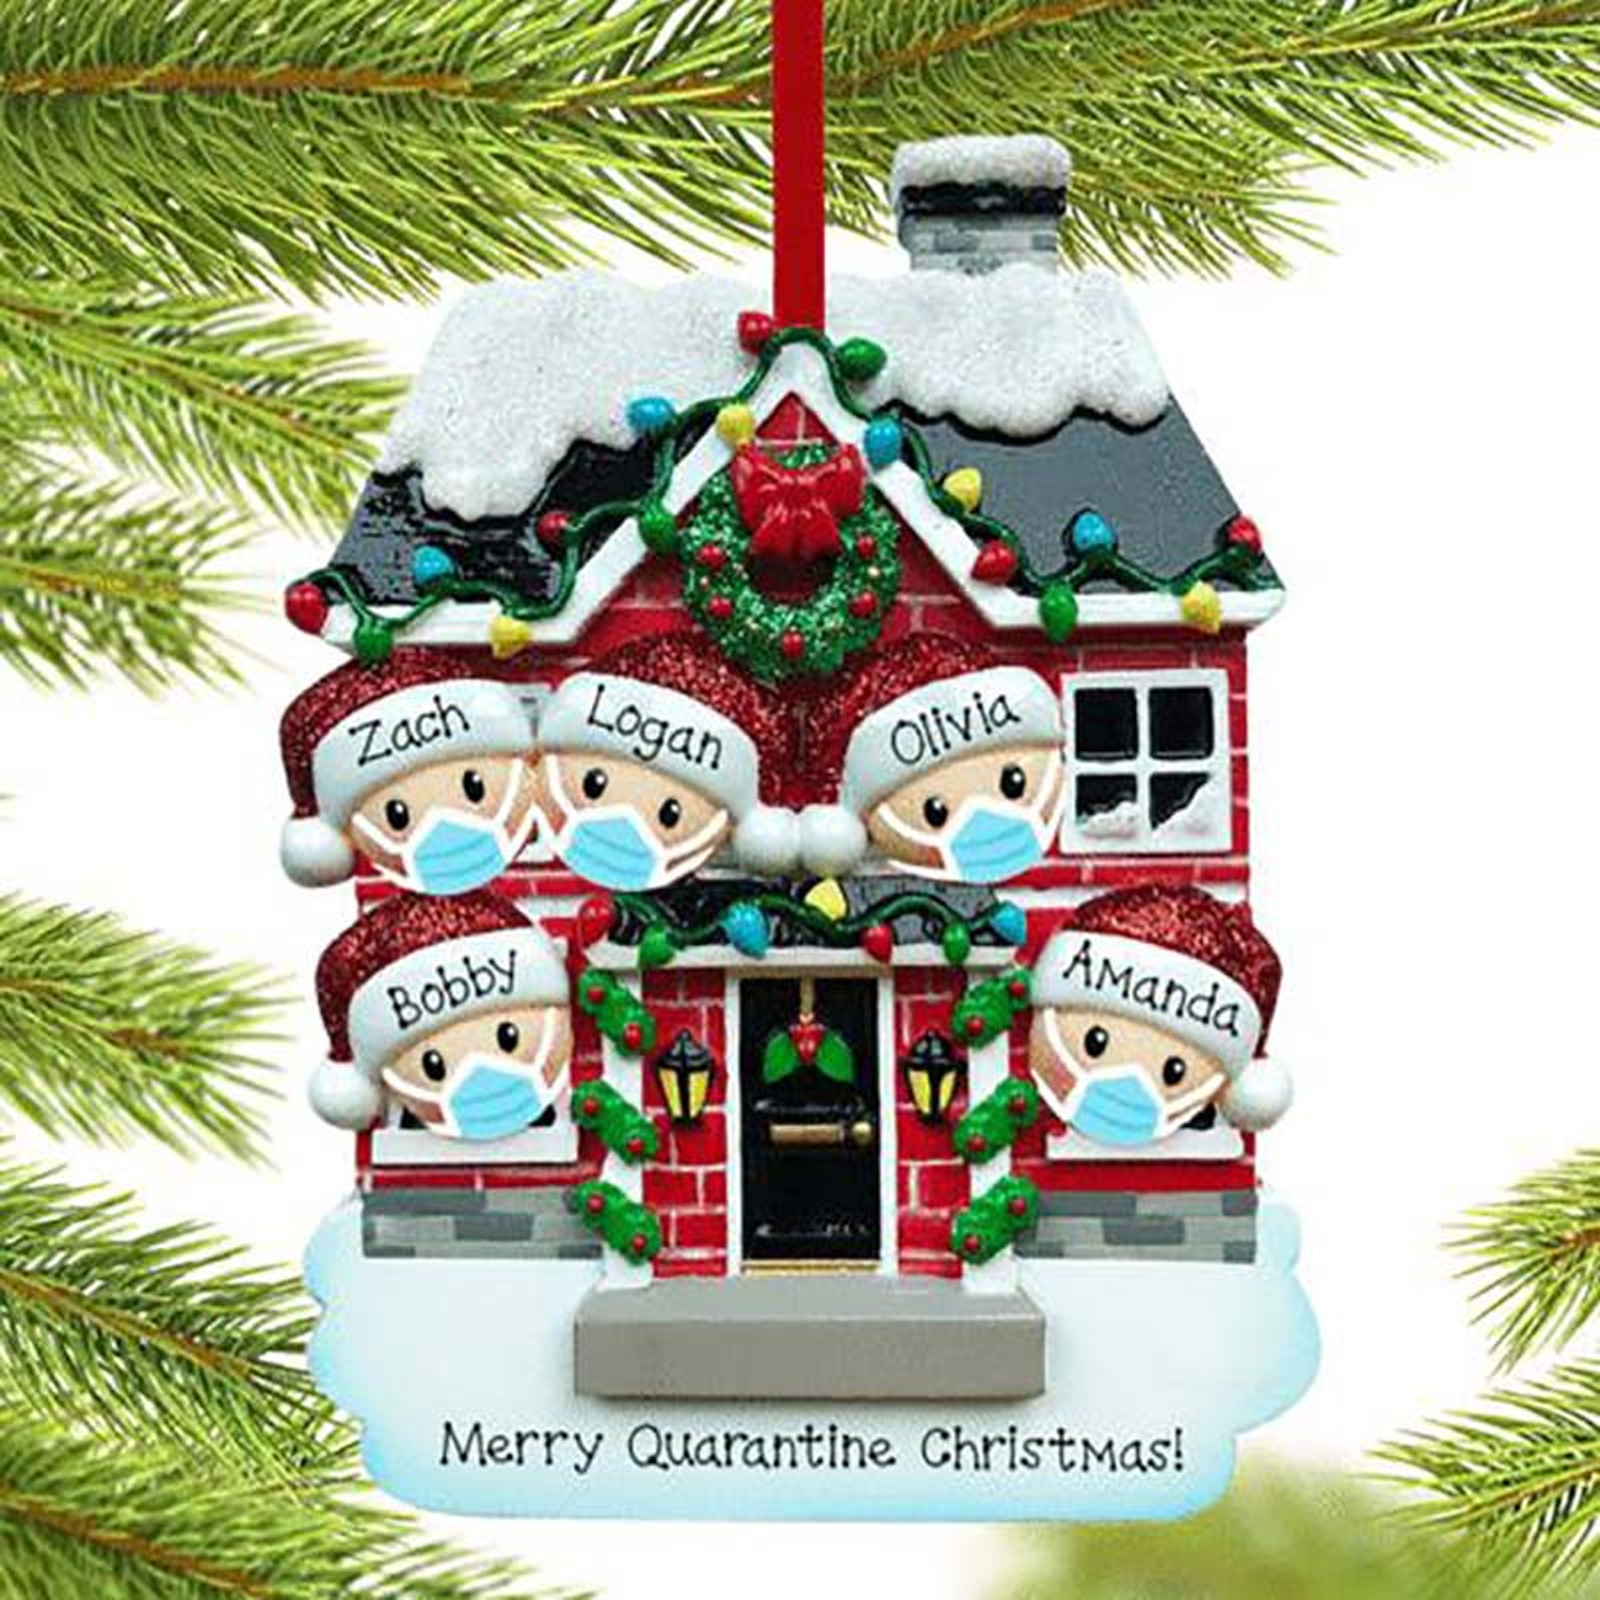 SZJHXIN 2020 Personalized Christmas Ornament Kit with Survived Family Special Keepsake Tree Hanging Home Party Holiday Decorations Gifts White, Family of 1